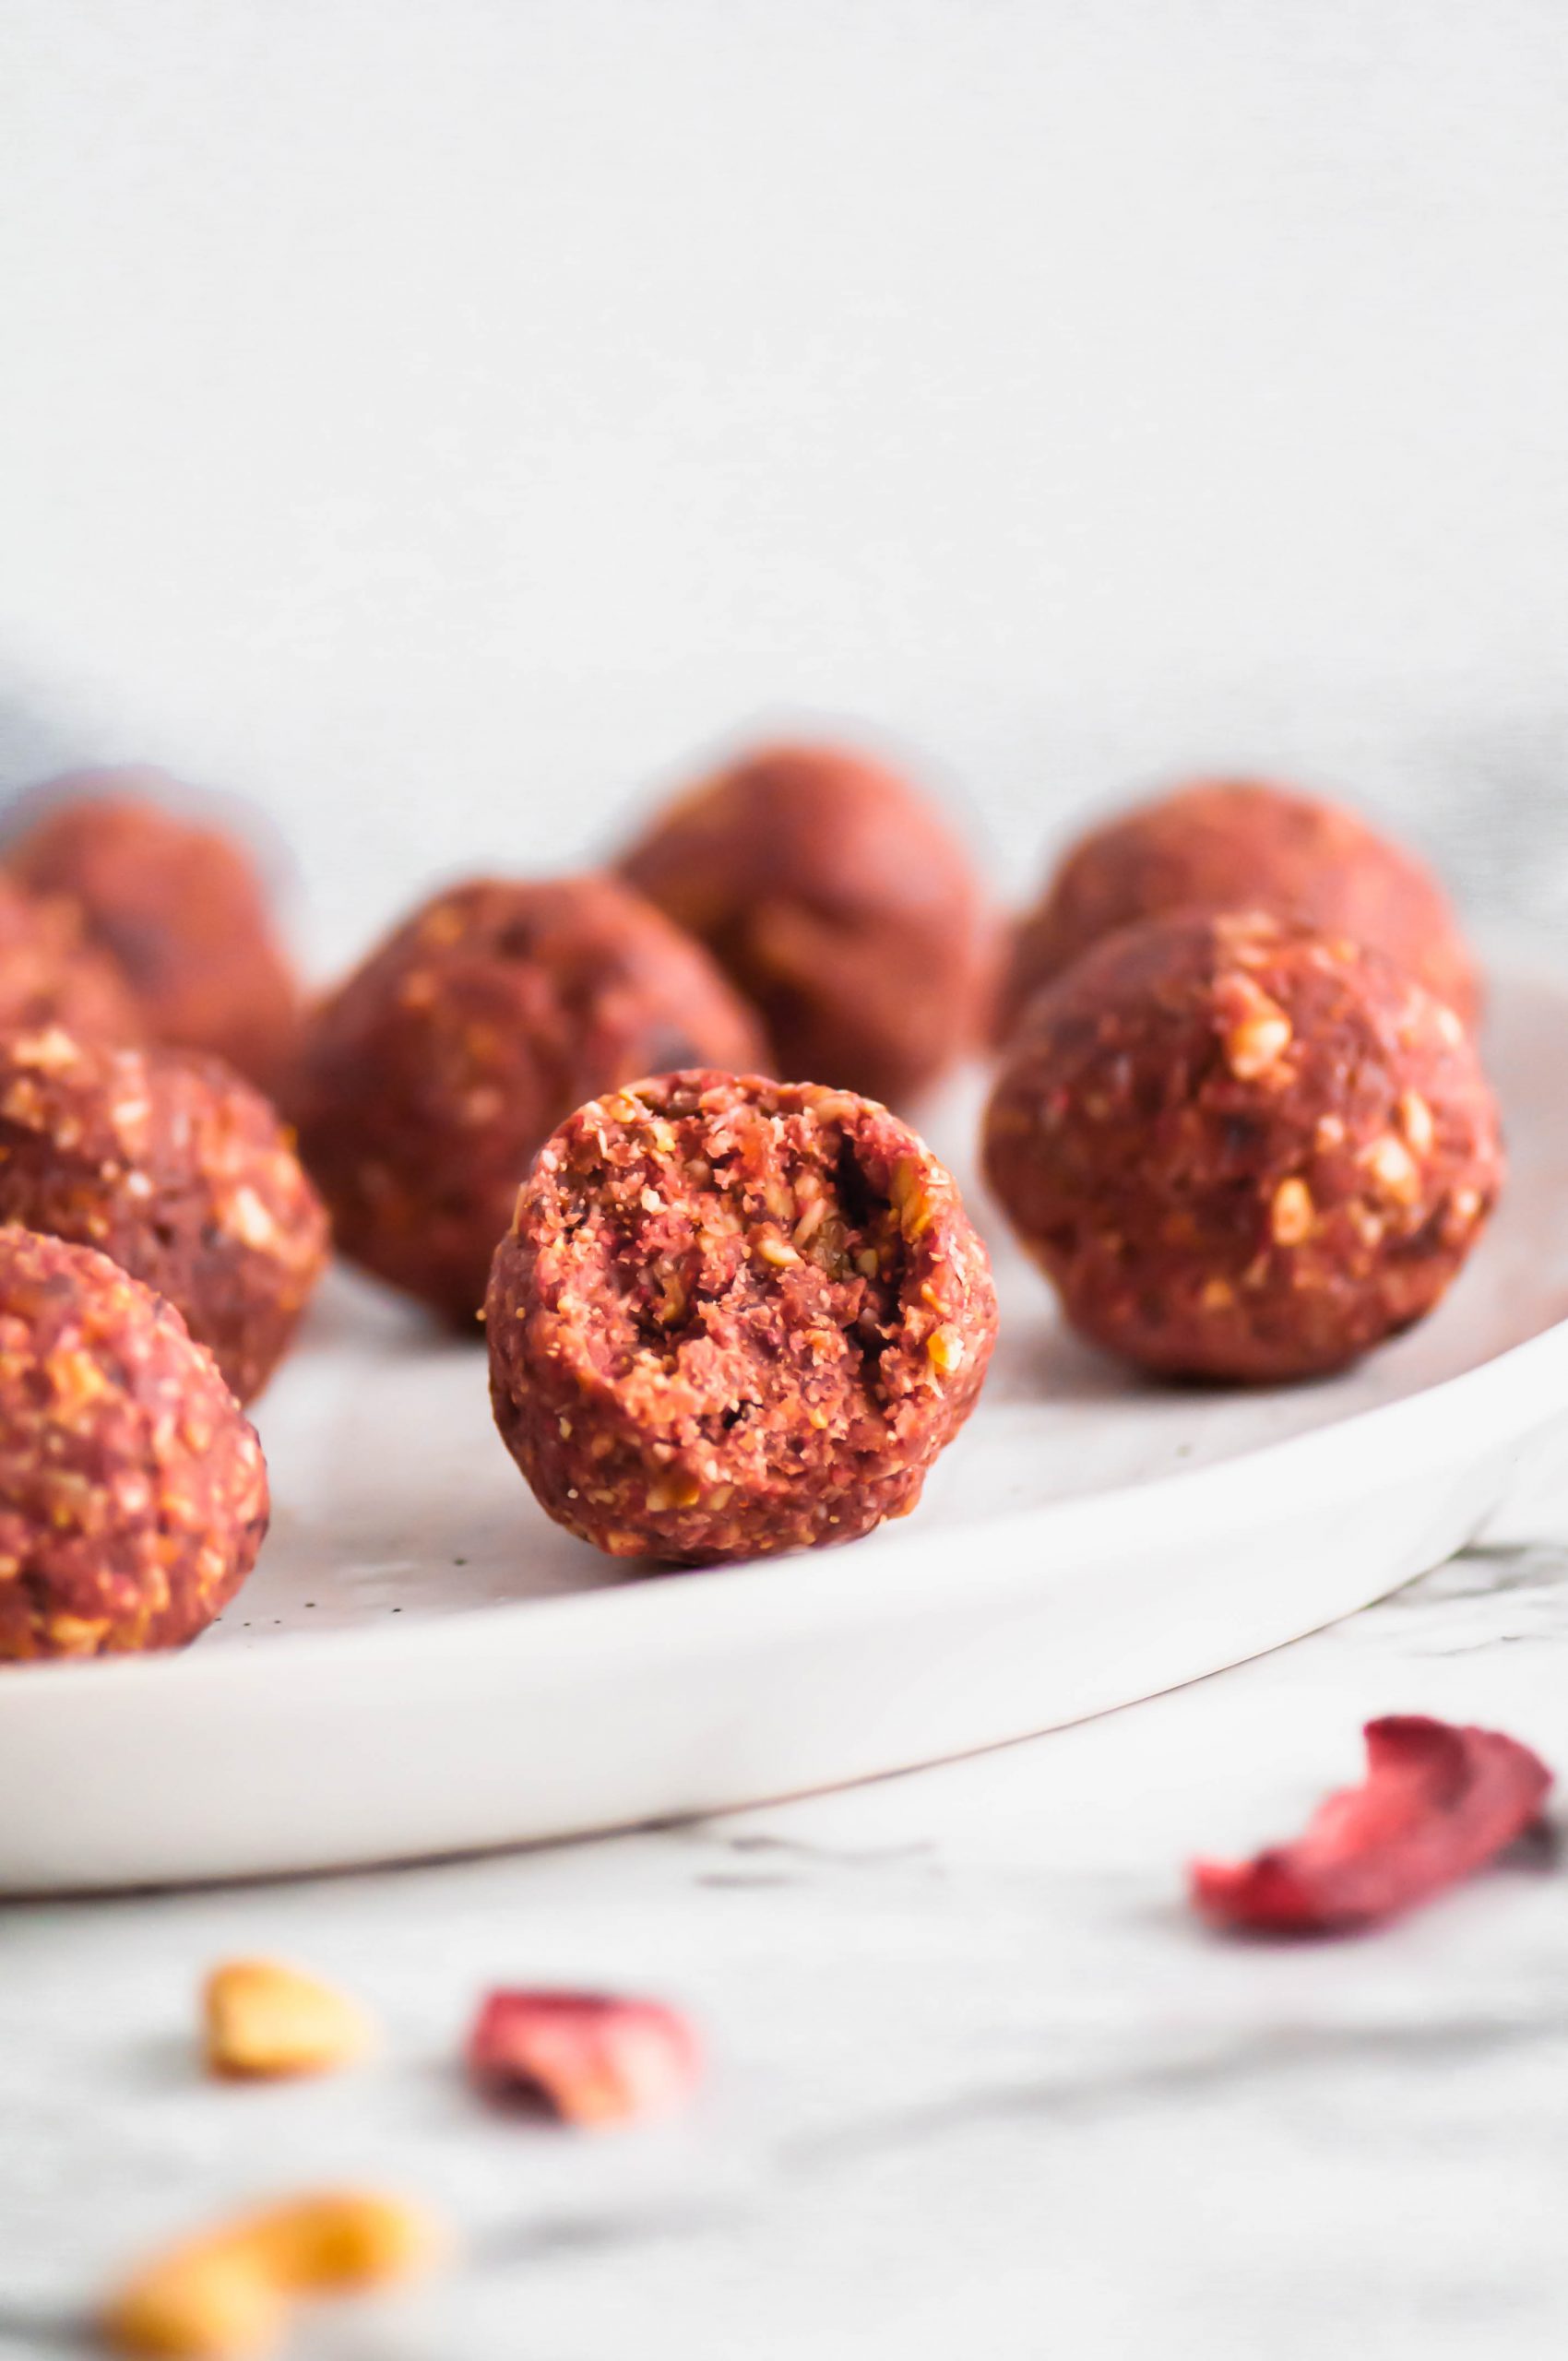 Need a little energy boost or a healthy snack? These Strawberry Energy Balls are super simple to make and sweetly delicious to eat.